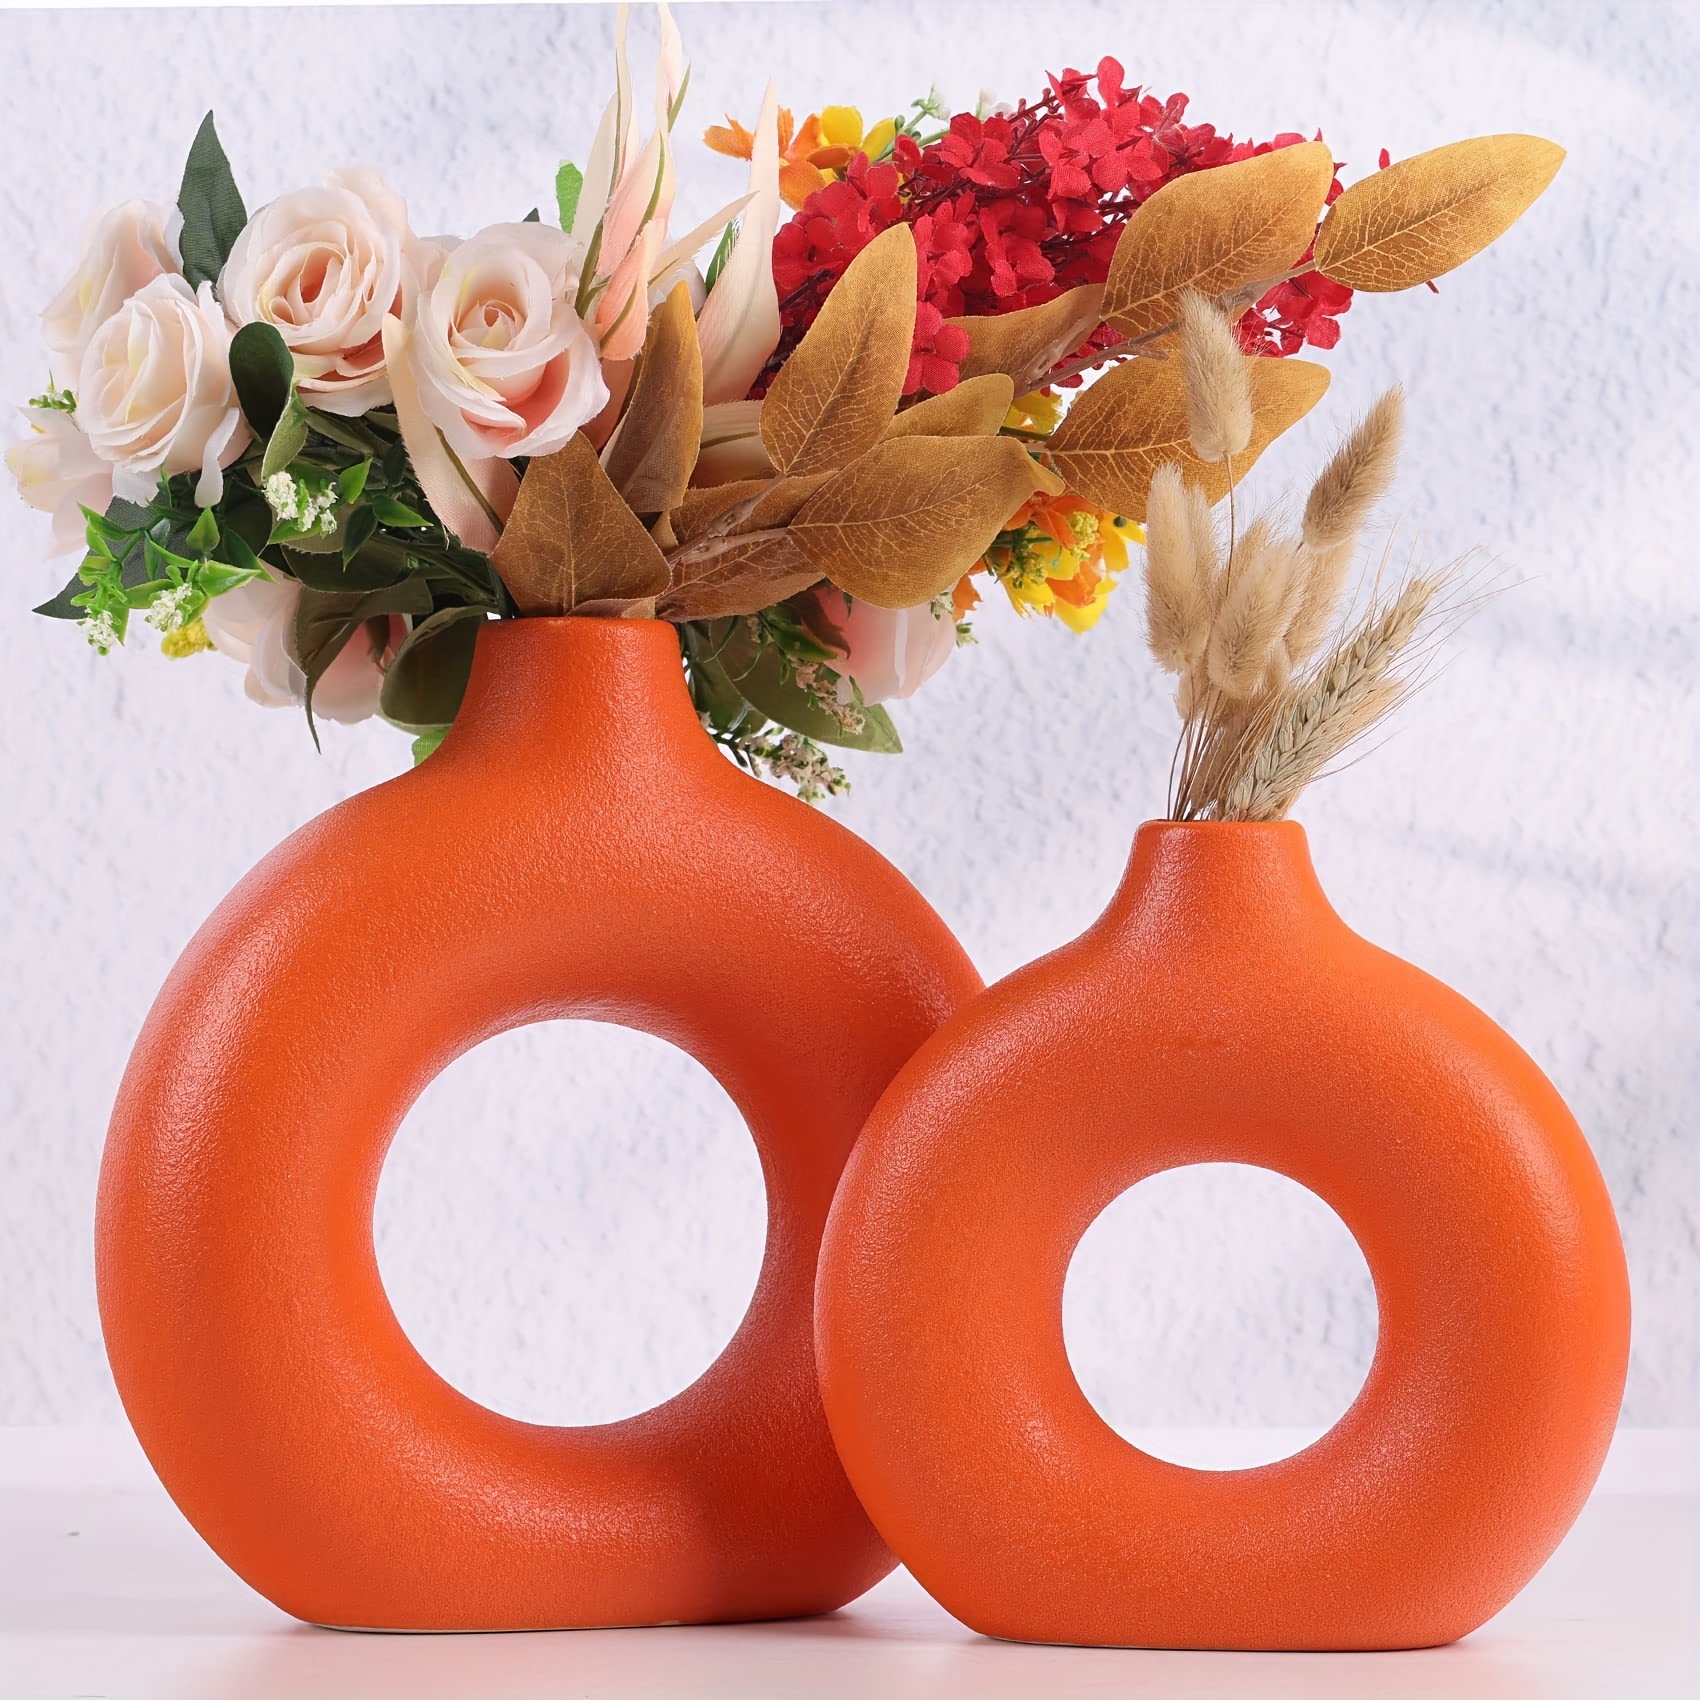 2pcs orange ceramic vase round pampas grass flower vases for modern home decor boho nordic minimalist style for living room kitchen dining table office decorative centerpieces gift no plants included